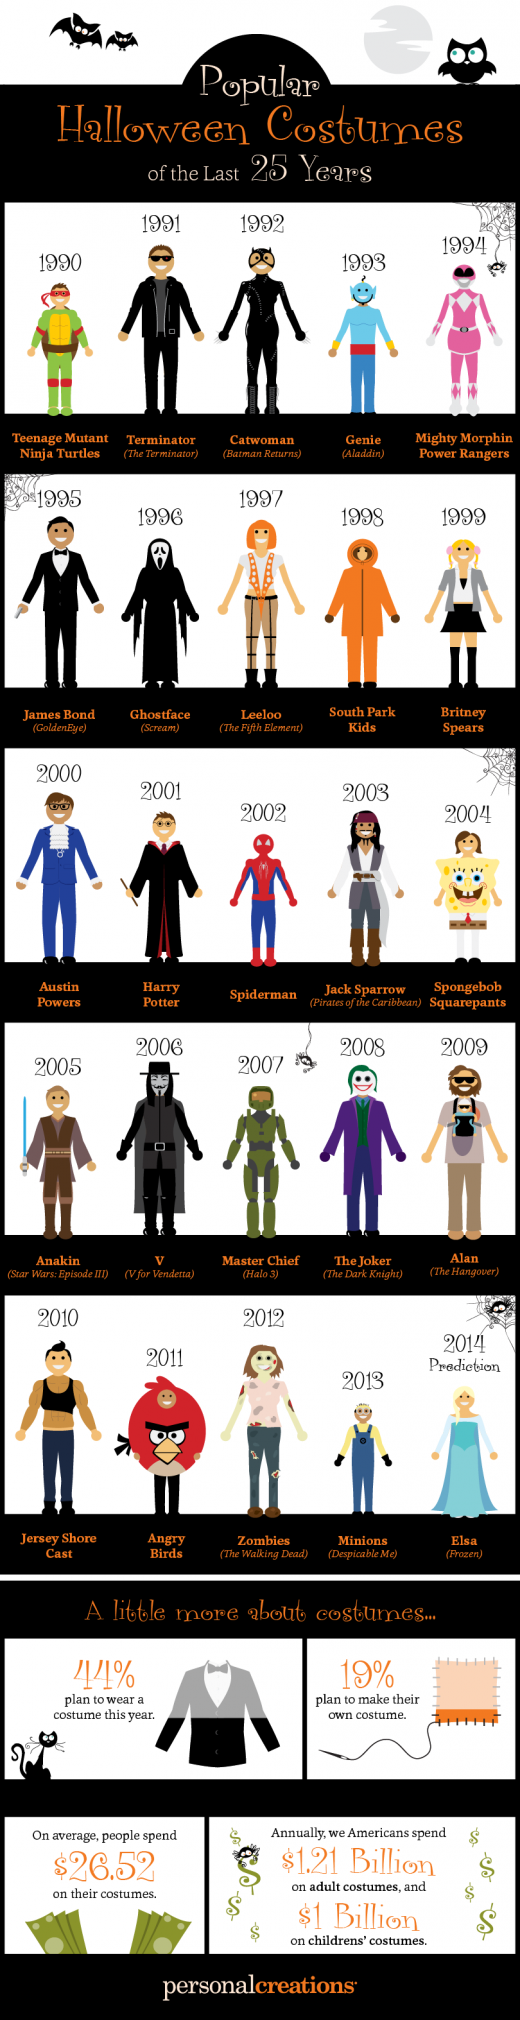 25-years-costumes.png (618.04 Kb)